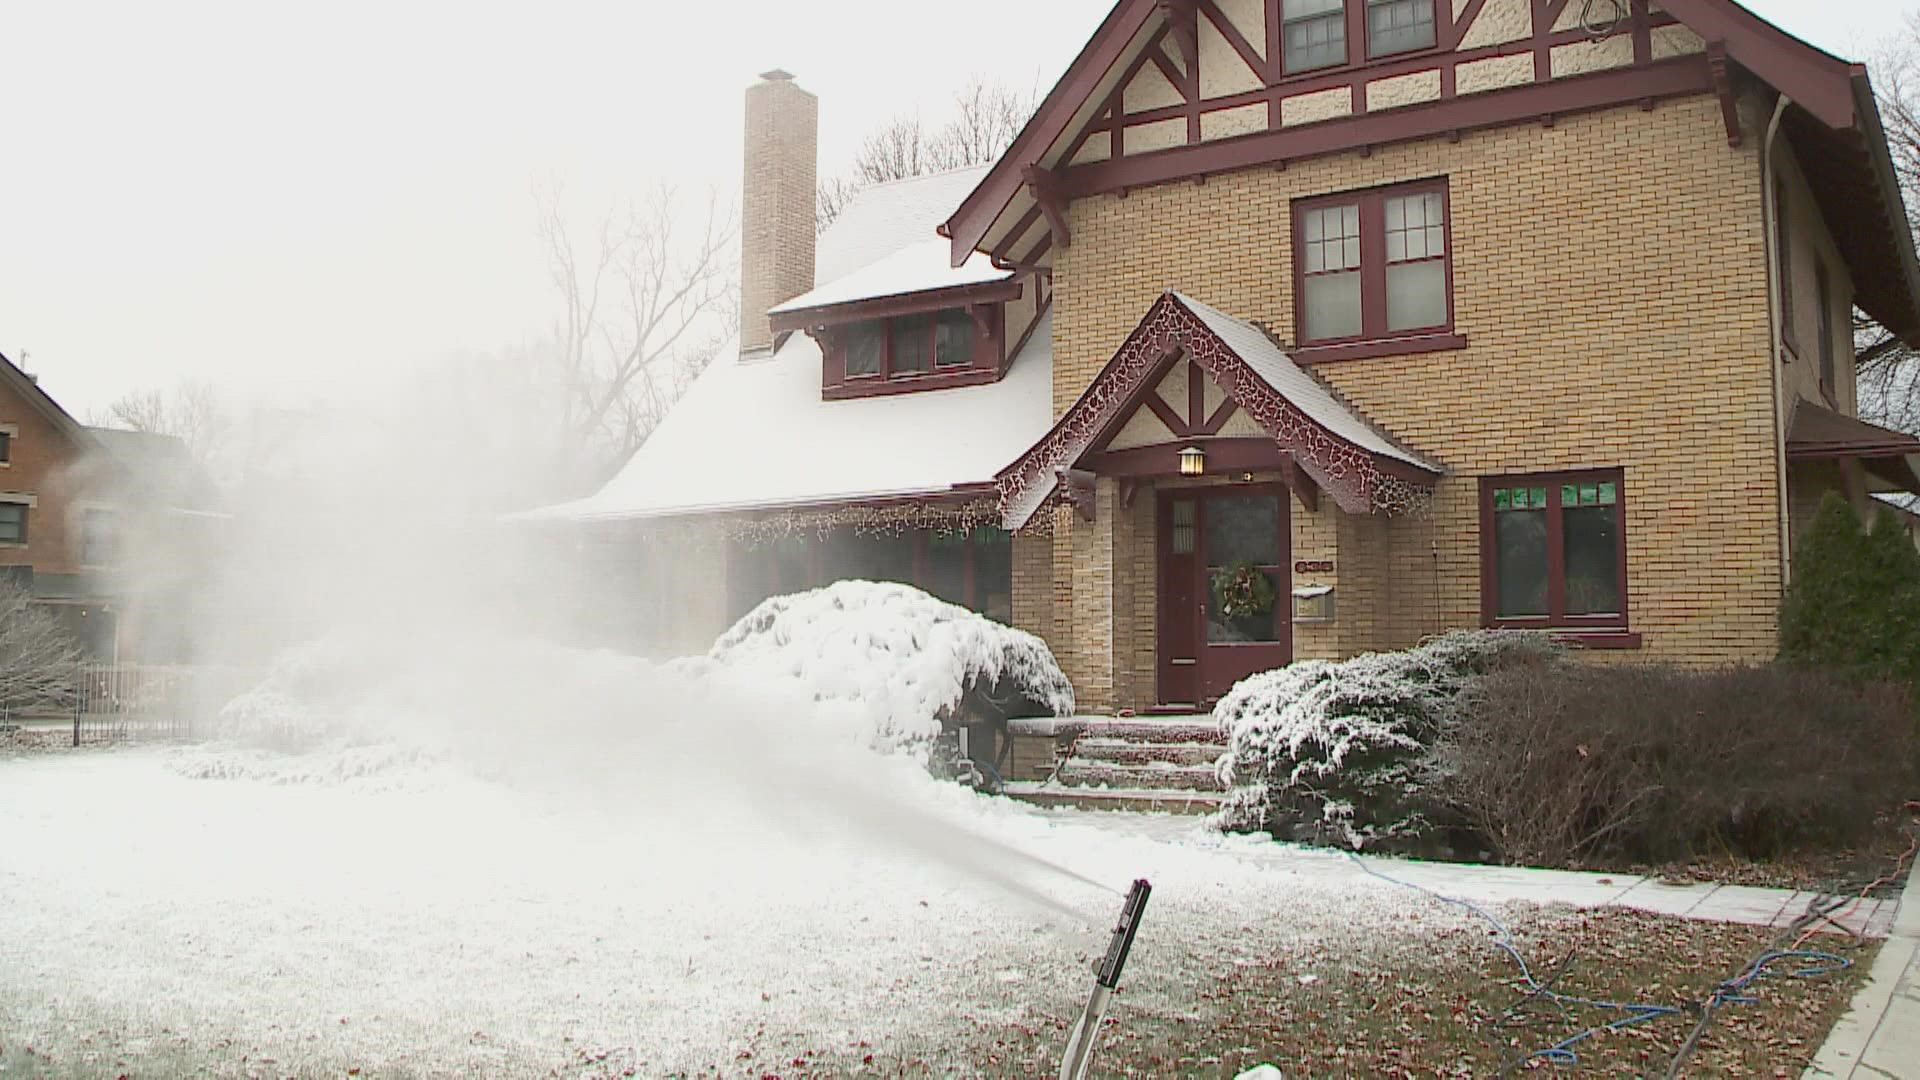 John Dana Custis told Local 5 he was just looking to bring some joy on Wednesday when he broke out his snowmaker.